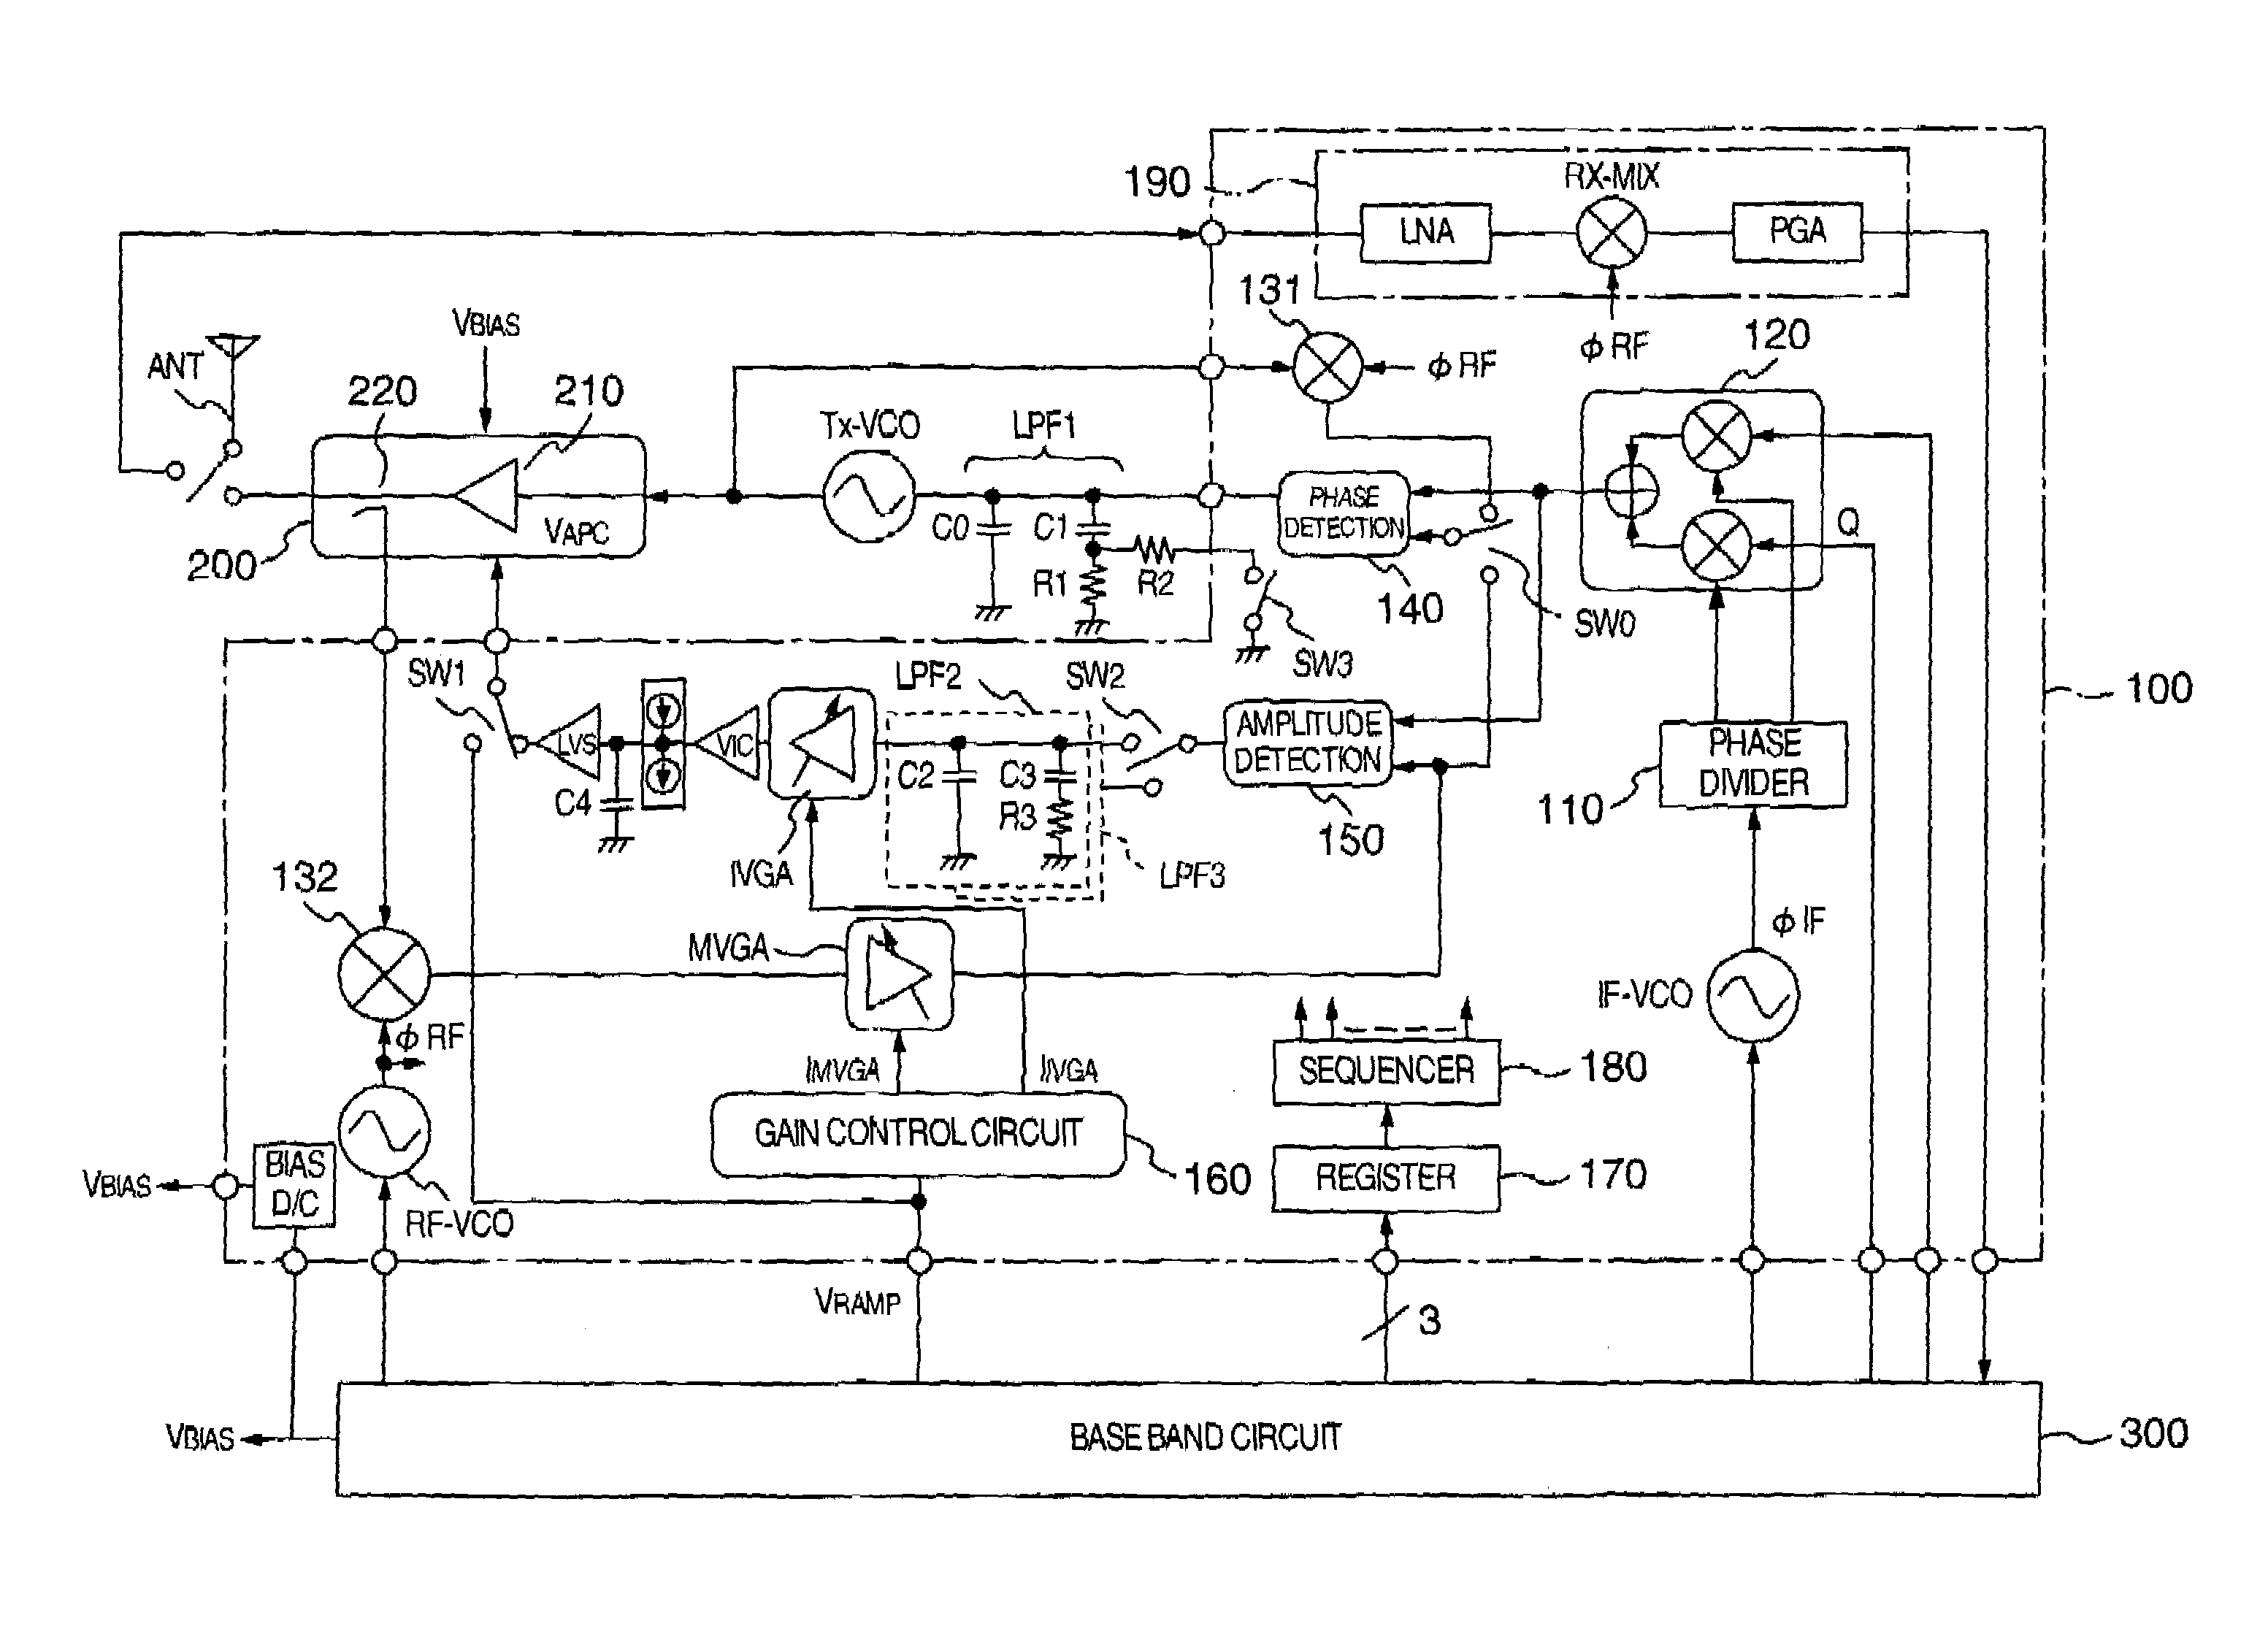 Transmitter having a phase control loop whose frequency bandwidth is varied in accordance with modulation modes